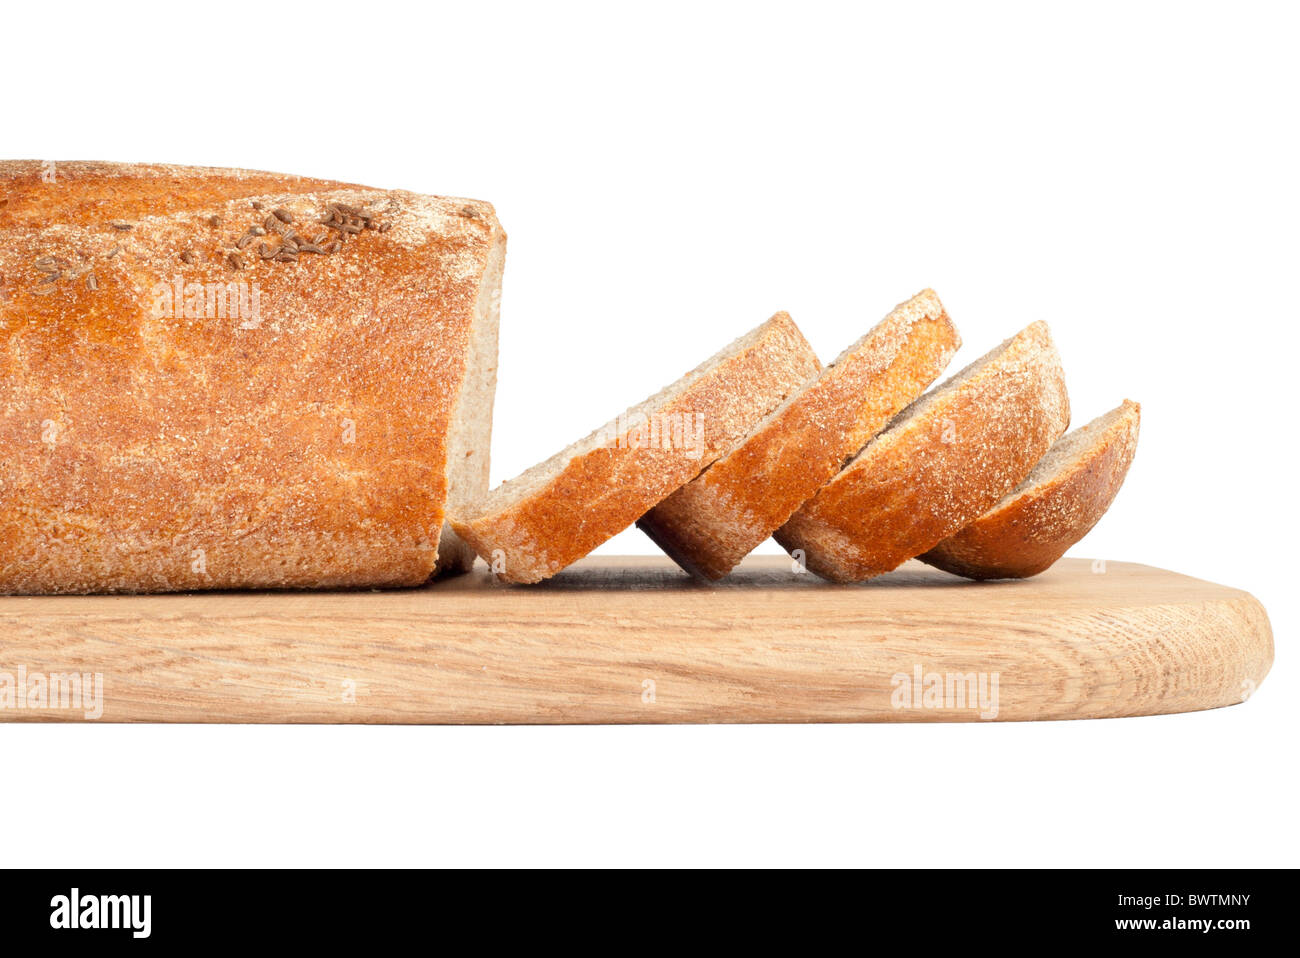 Sliced bread on a wooden chopping board isolated on white Stock Photo